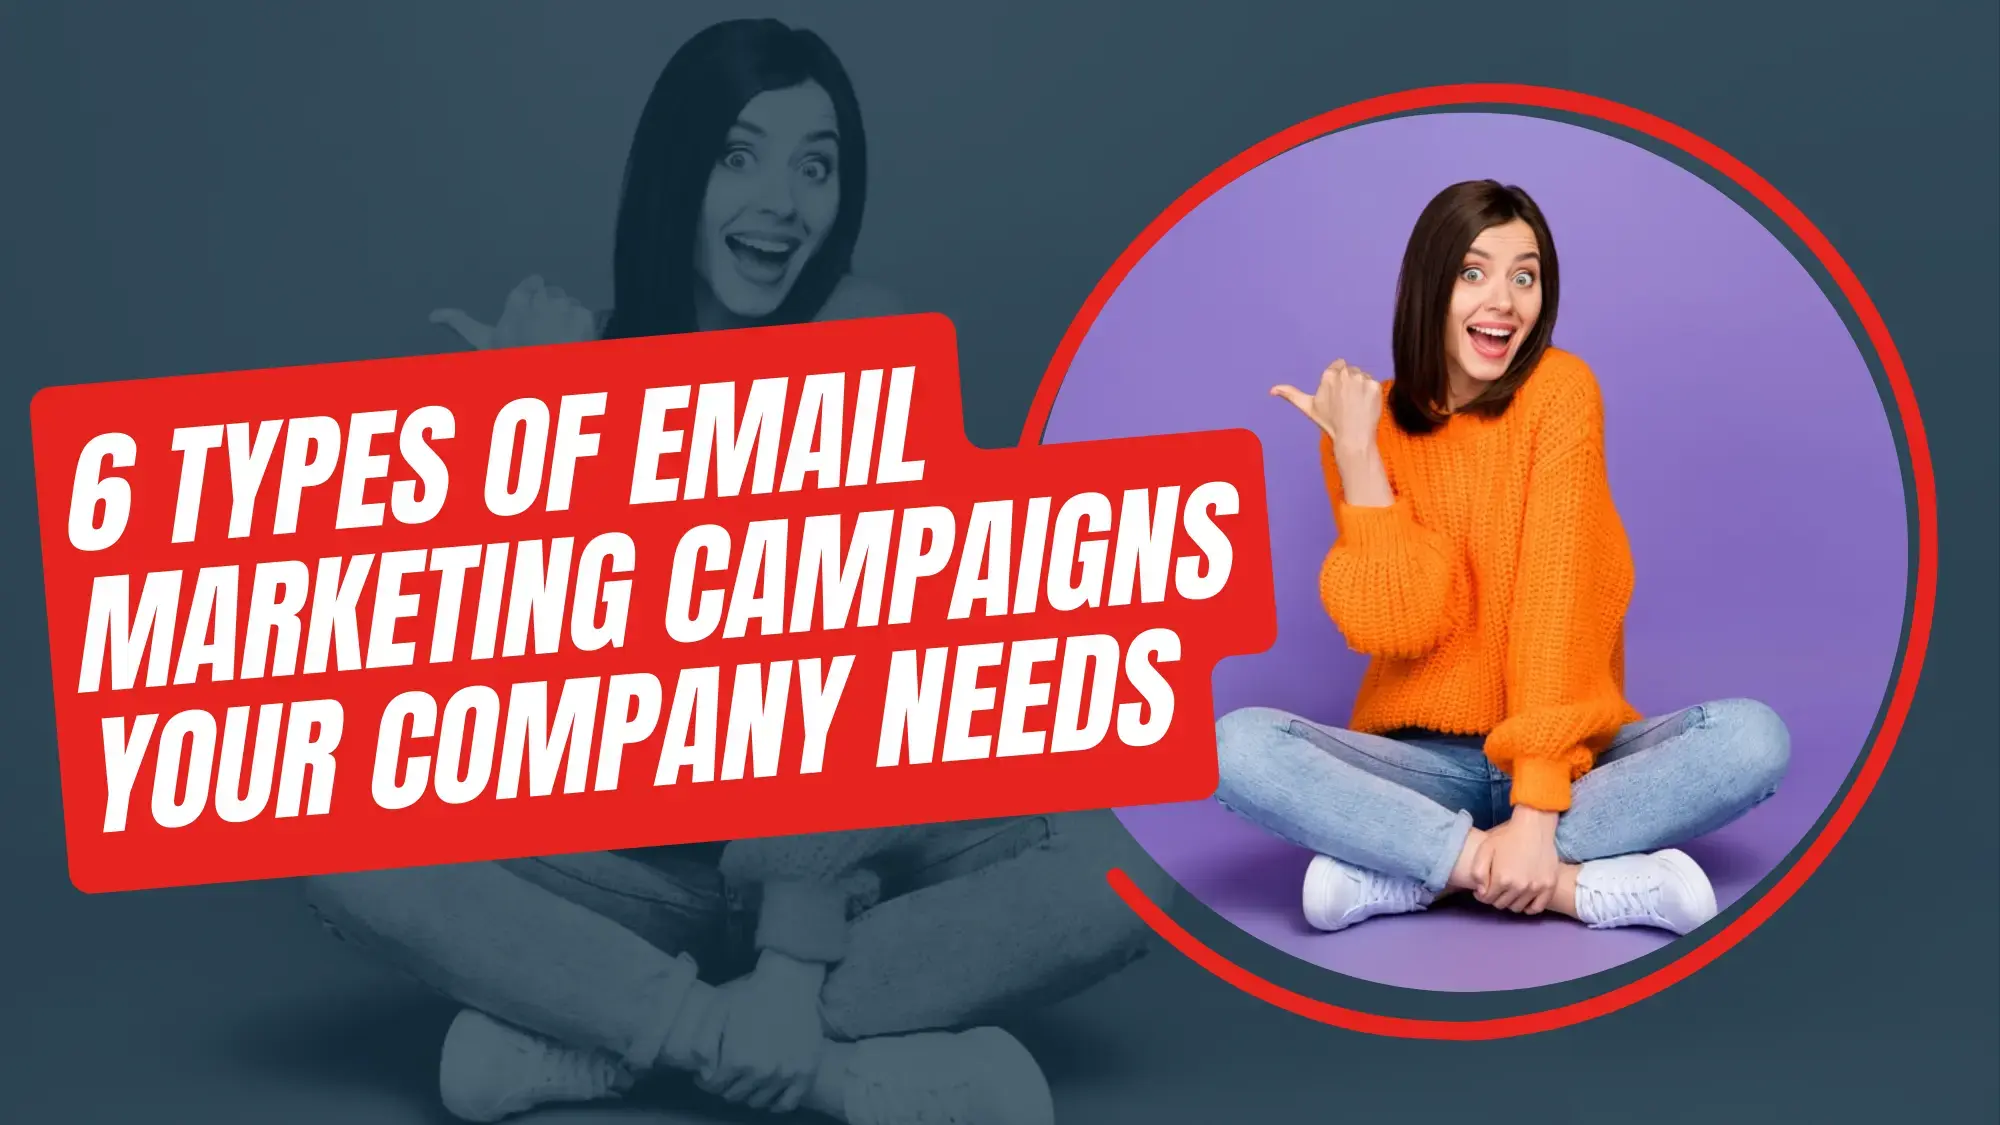 6 Types Of Email Marketing Campaigns Your Company Needs